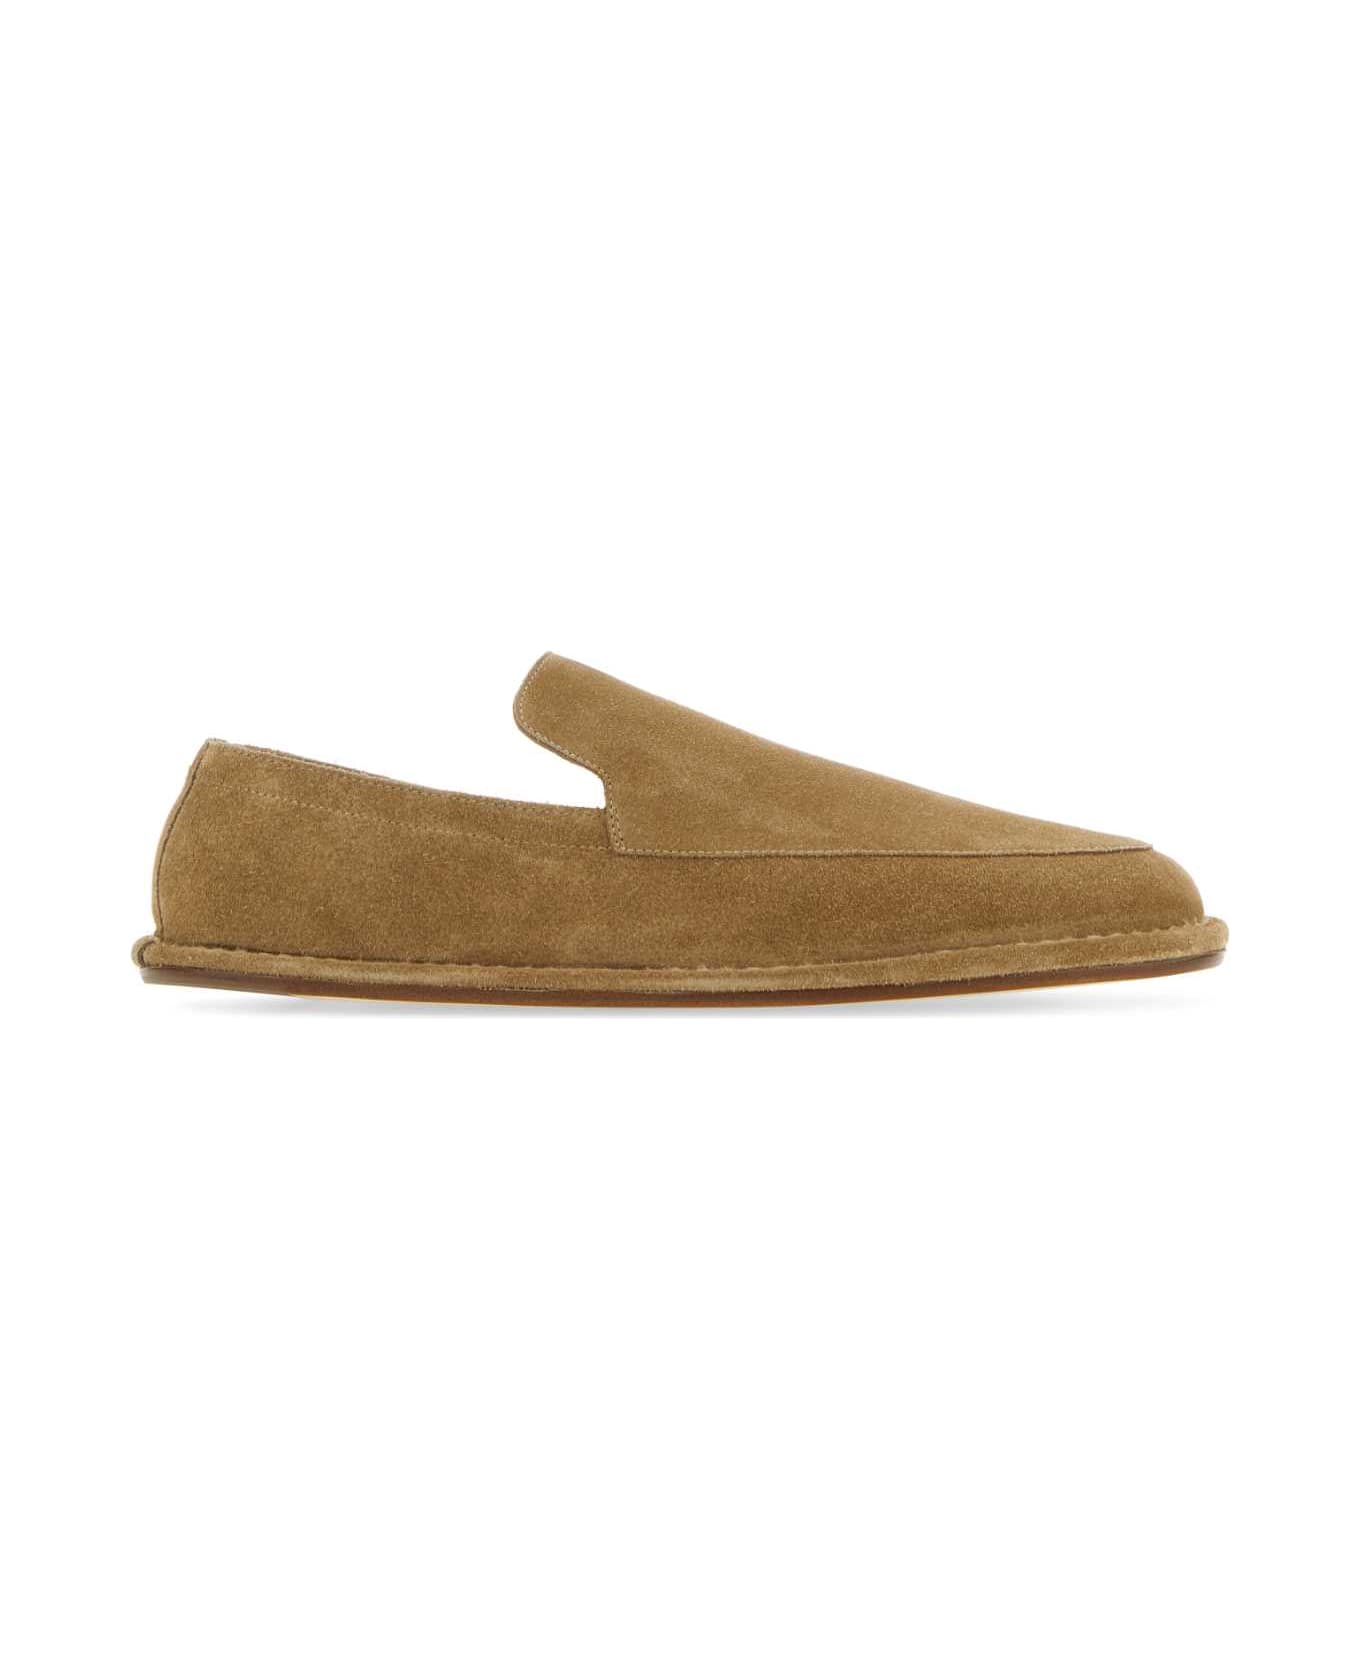 Maison Margiela Biscuit Suede Loafers - T2172